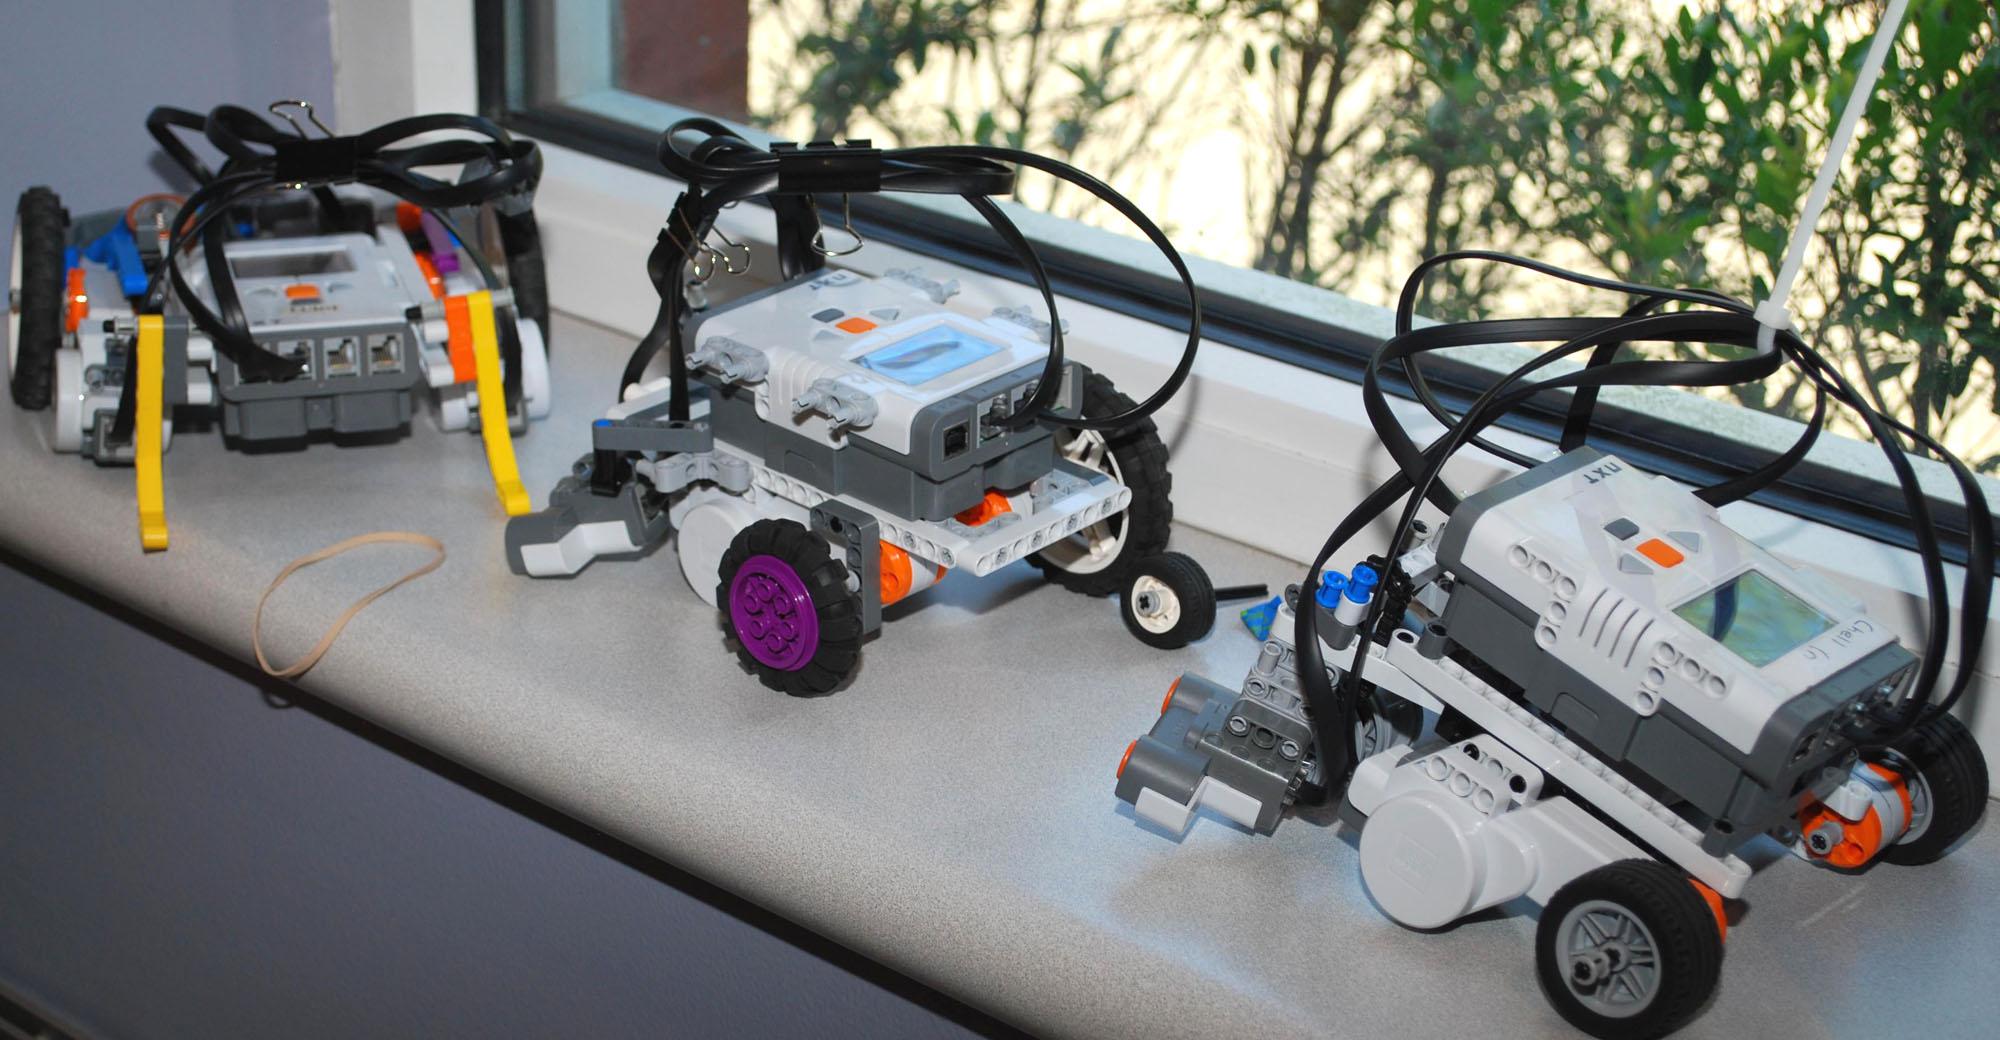 Robotics And Beyond offers summer camps in New Milford - Image